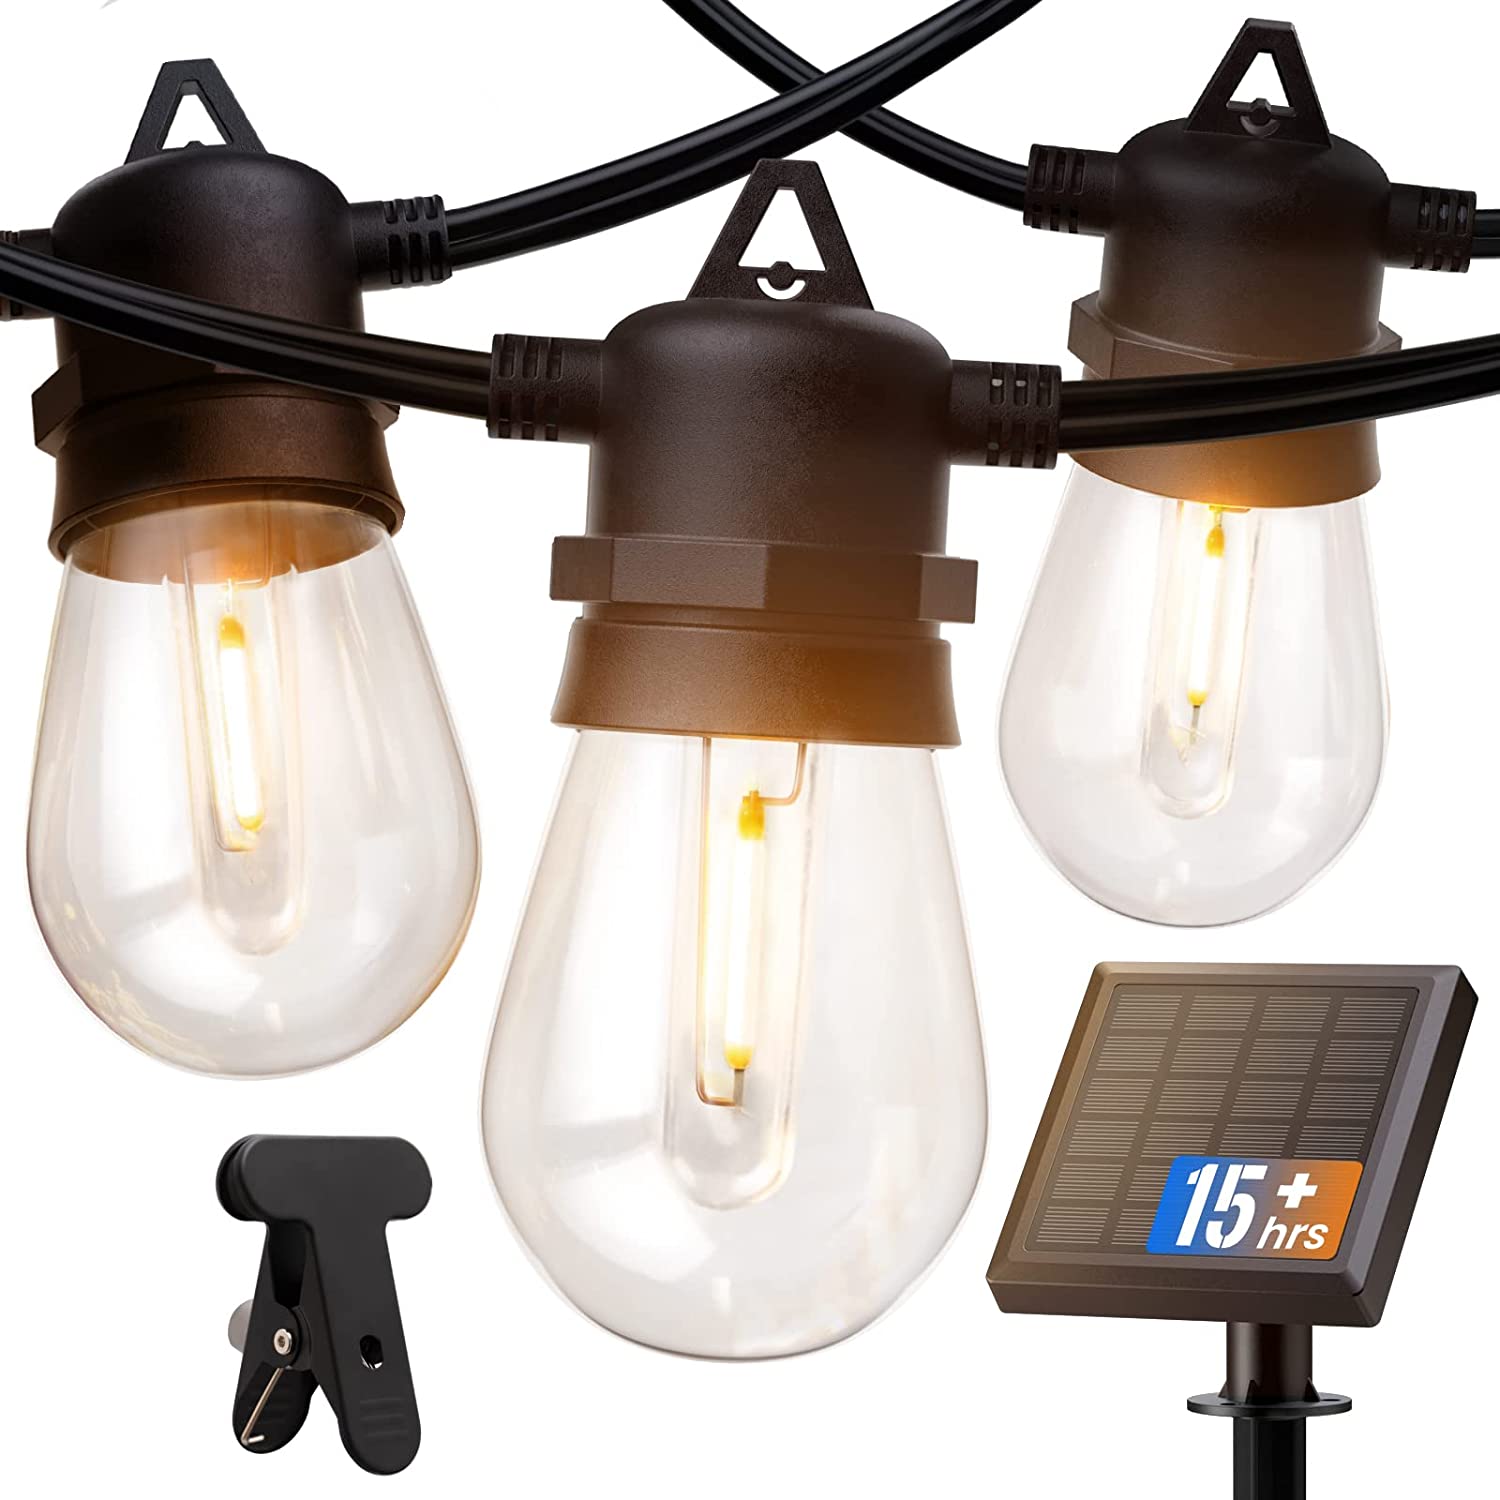 addlon Solar Powered String Lights Outdoor: 27Ft & 48FT for $23.99 & $35.99 + Free Shipping